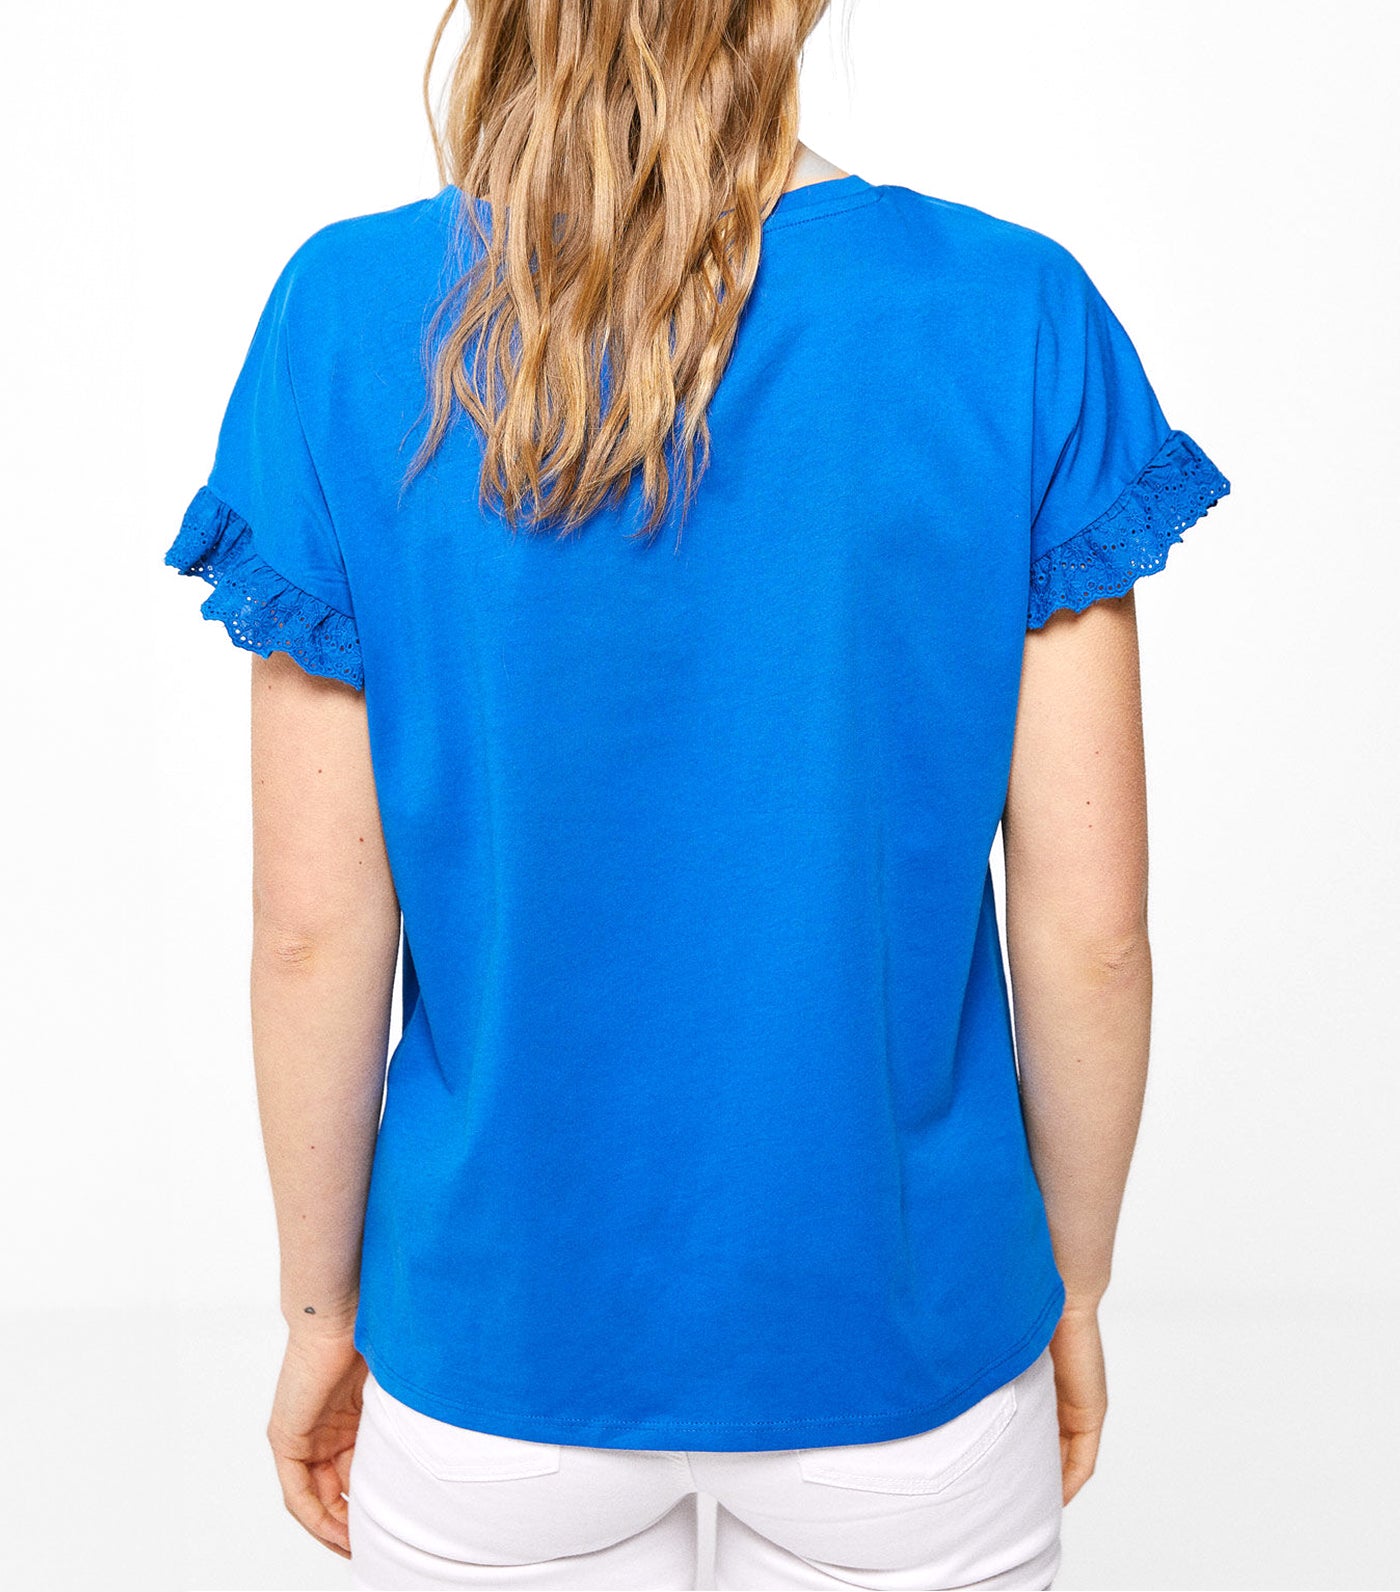 Embroidered Flower T-Shirt with Ruffles Blue